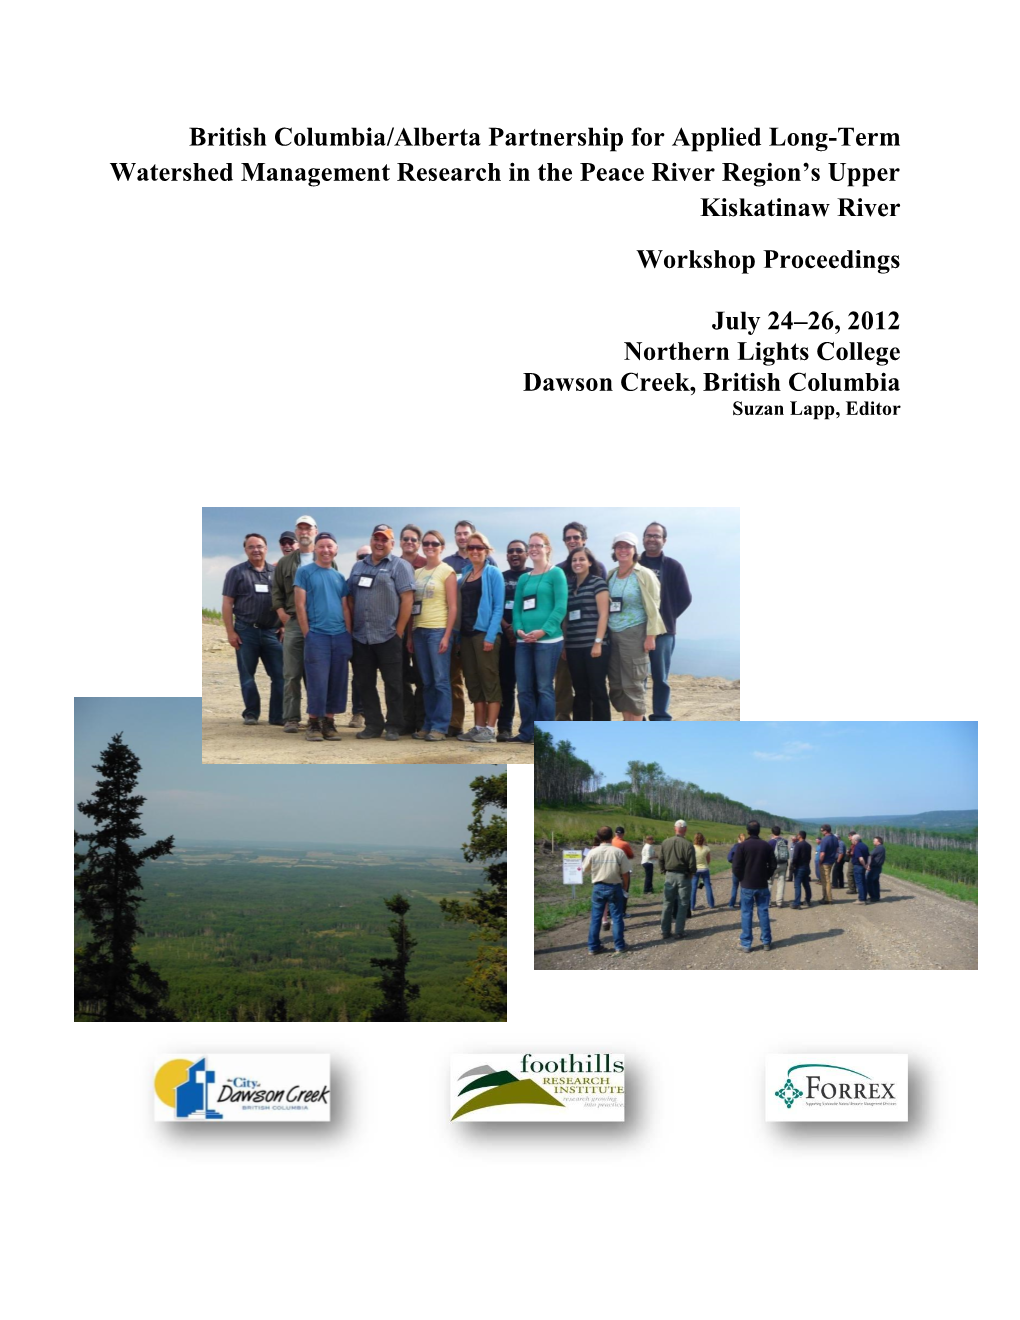 British Columbia/Alberta Partnership for Applied Long-Term Watershed Management Research in the Peace River Region’S Upper Kiskatinaw River Workshop Proceedings